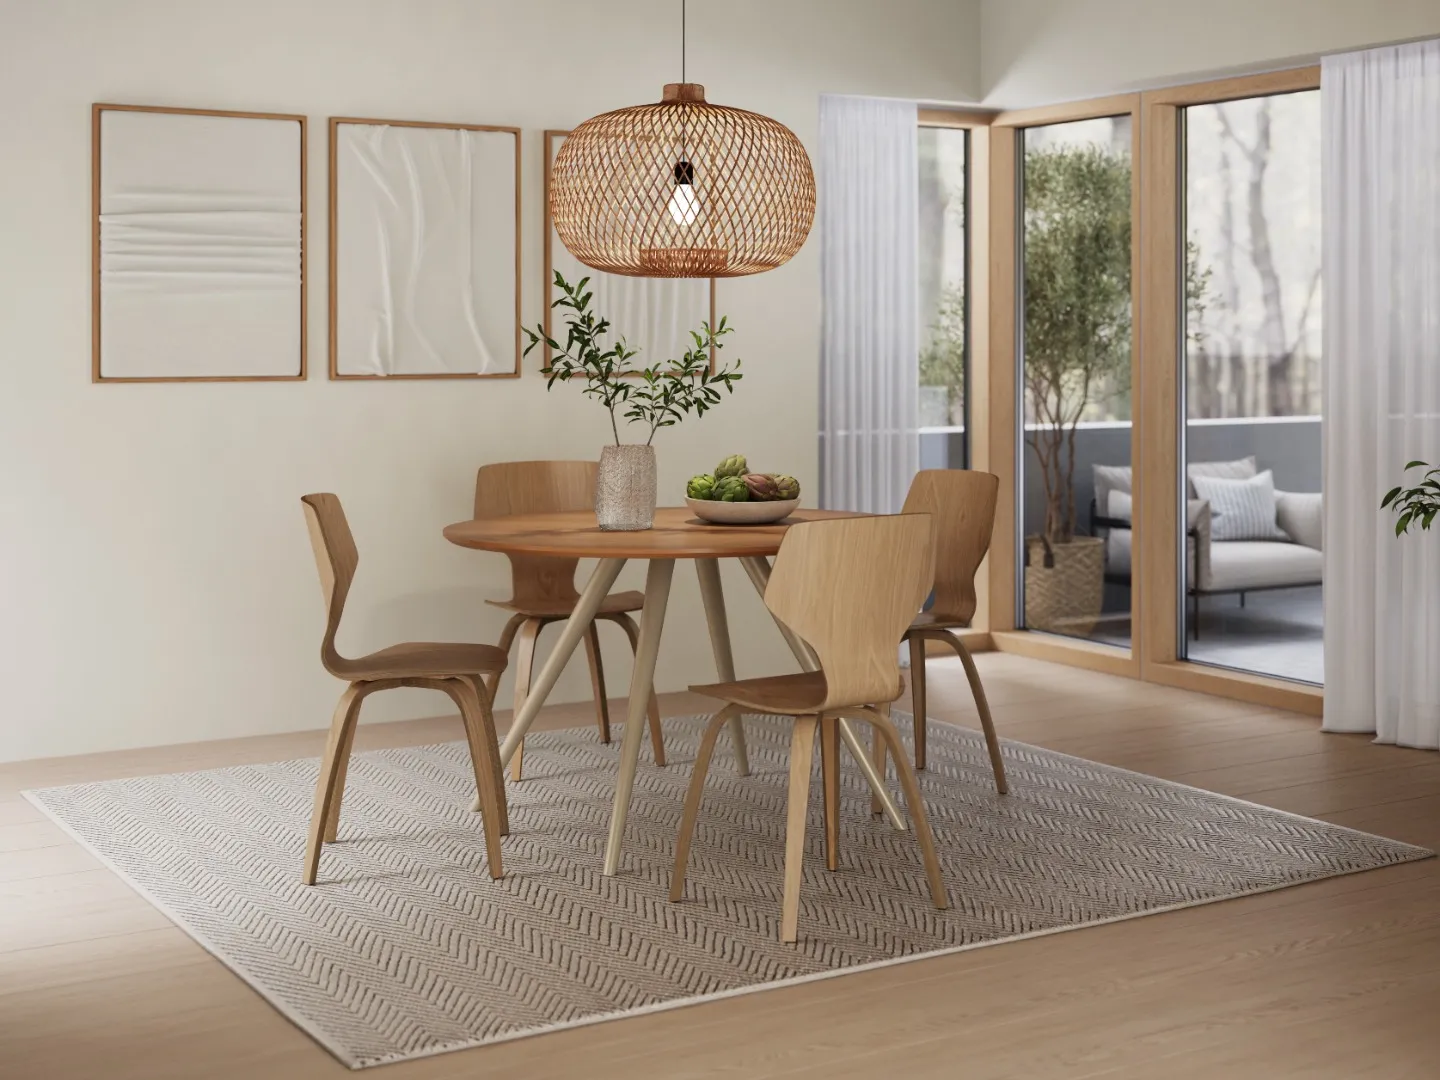 DAN-FORM's S.I.T chairs in oak veneer around the ECLIPSE table with oak top